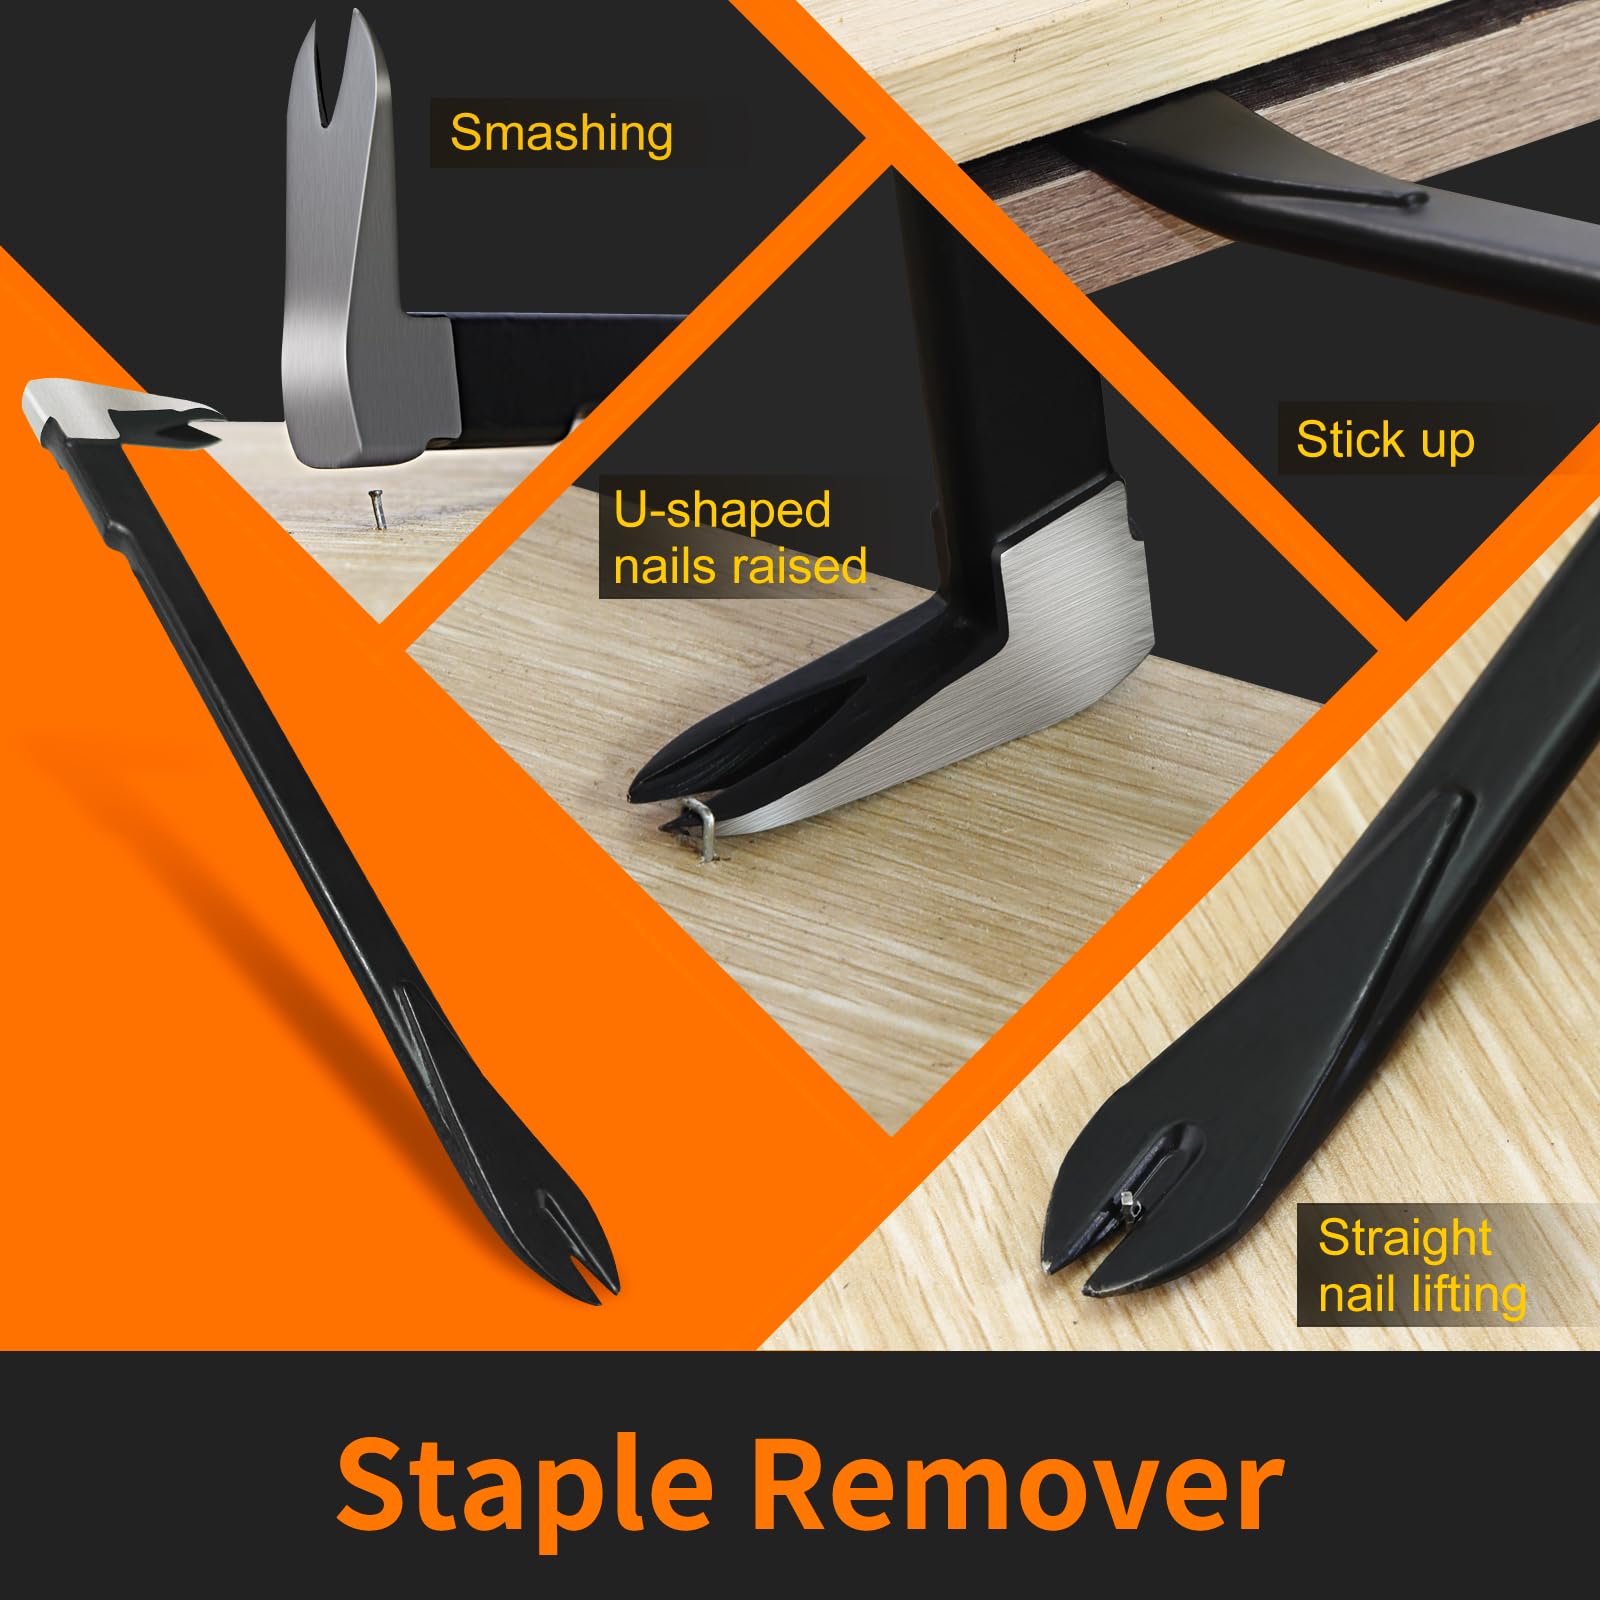 How to Use the Staple Remover： Smashing Stick up U-shaped nails raised Straight nail lifting